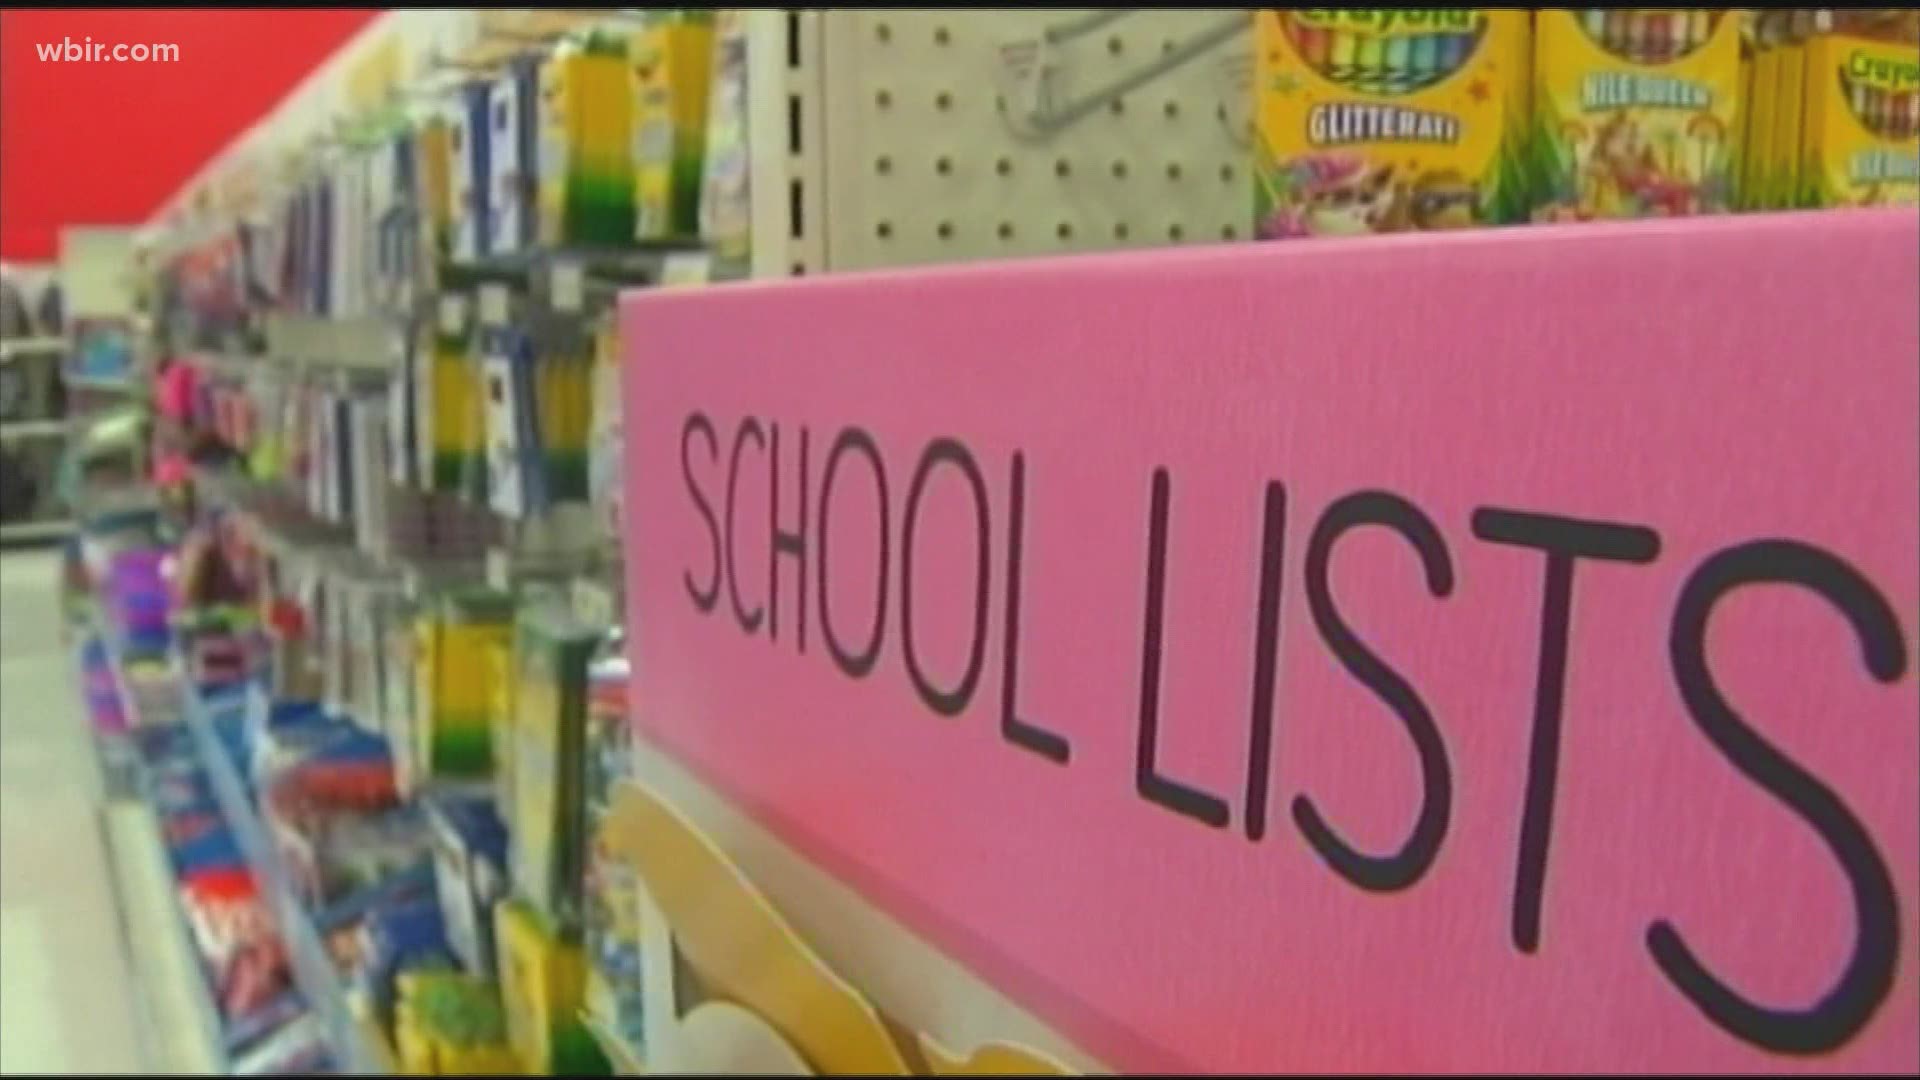 The average back-to-school spending per student is expected to be as much as $270, according to a survey from an accounting firm.